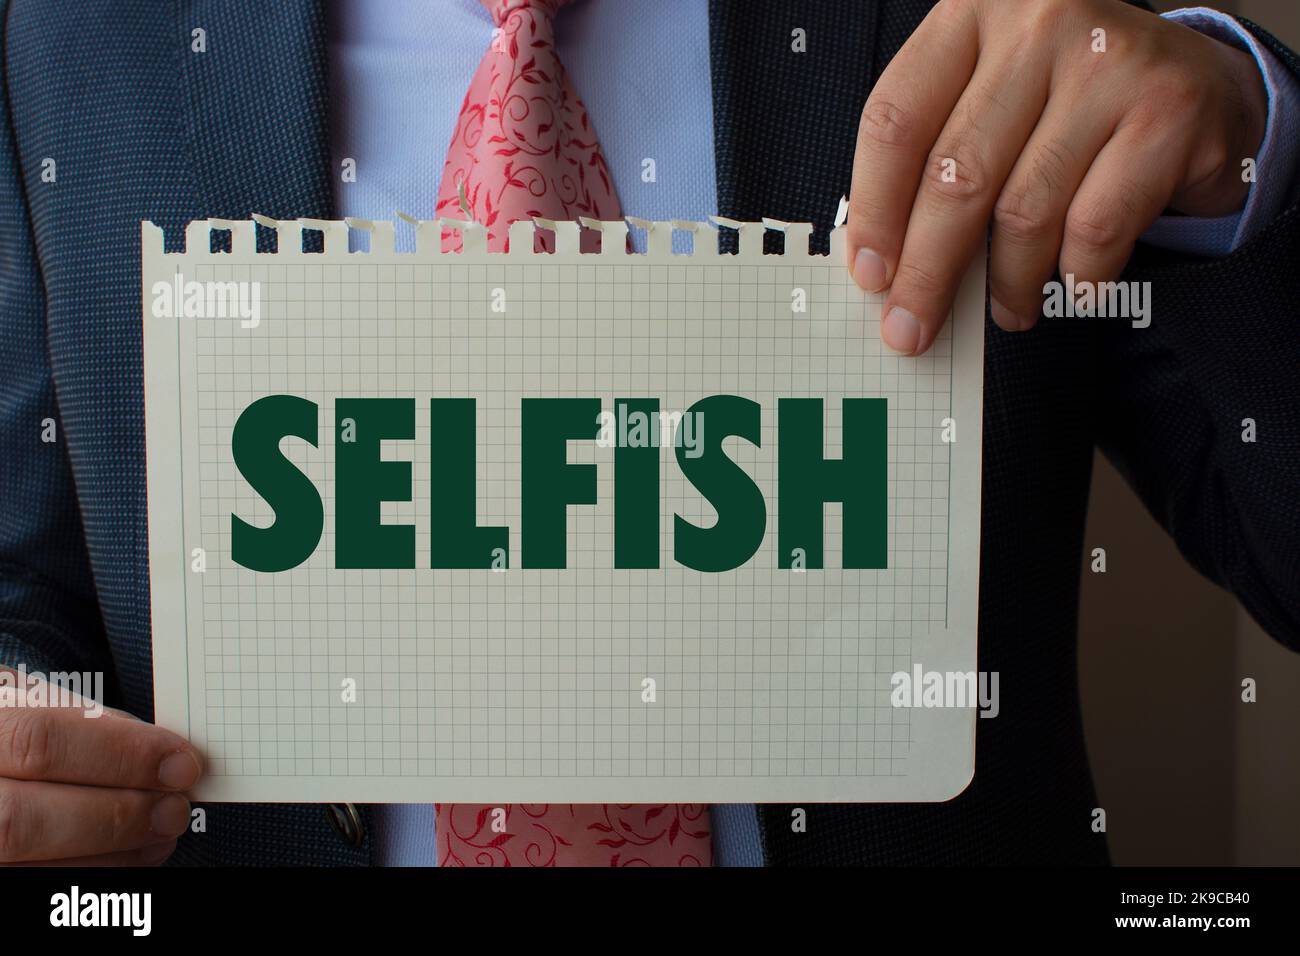 The paper in the hand of the man in the suit reads ''selfish''. Stock Photo